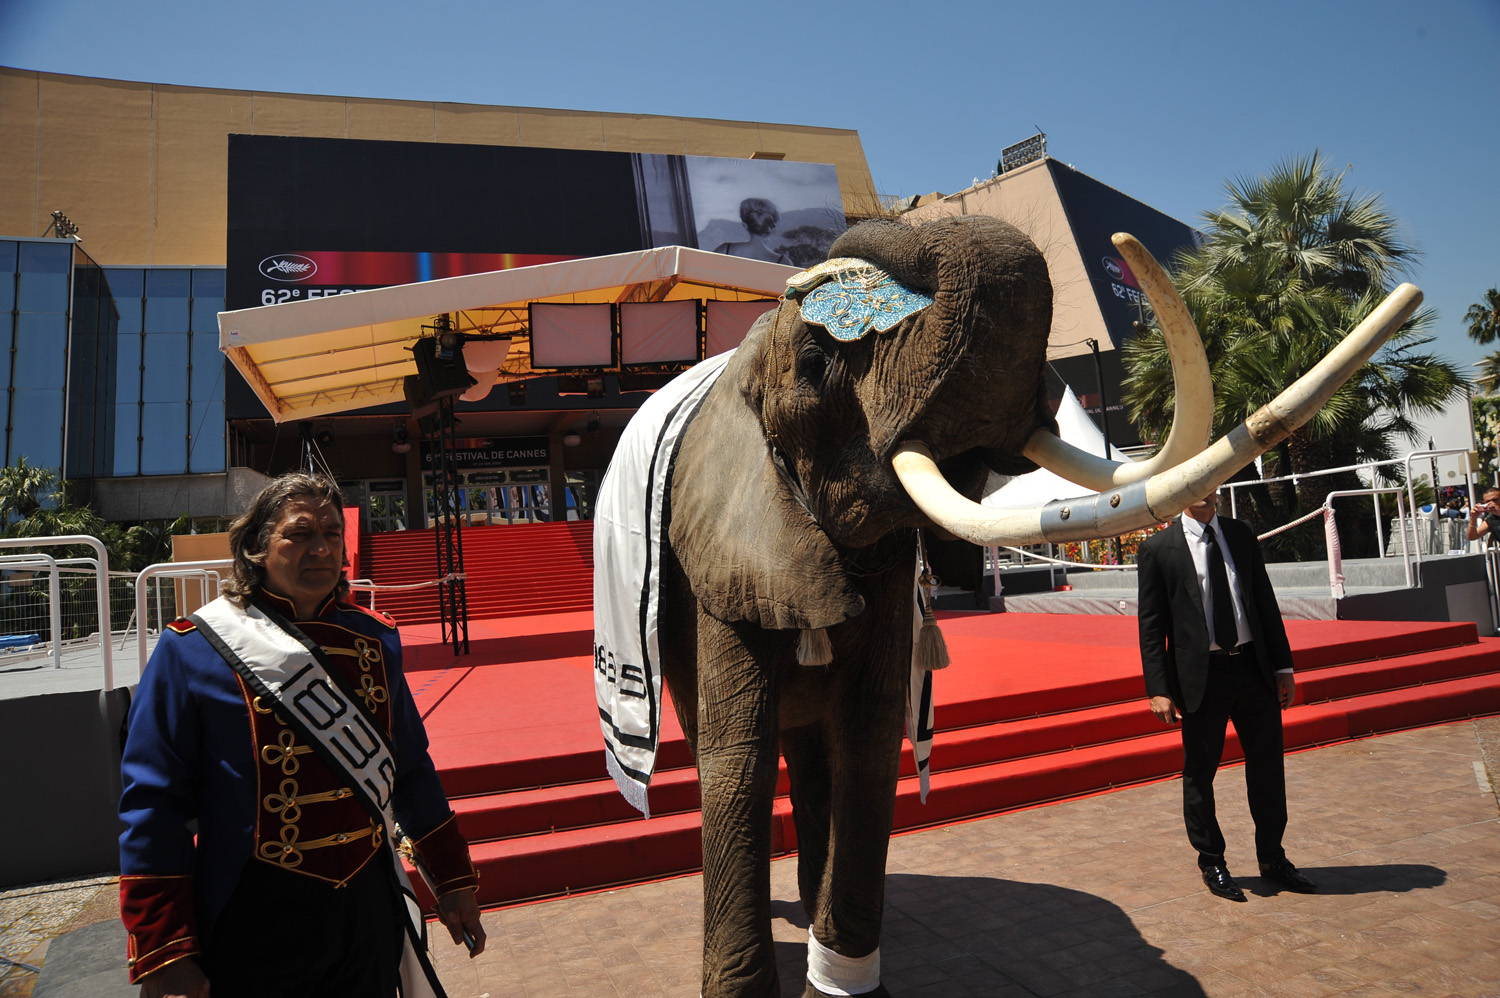 Seen in Cannes: OMG! An Elephant on the Croisette